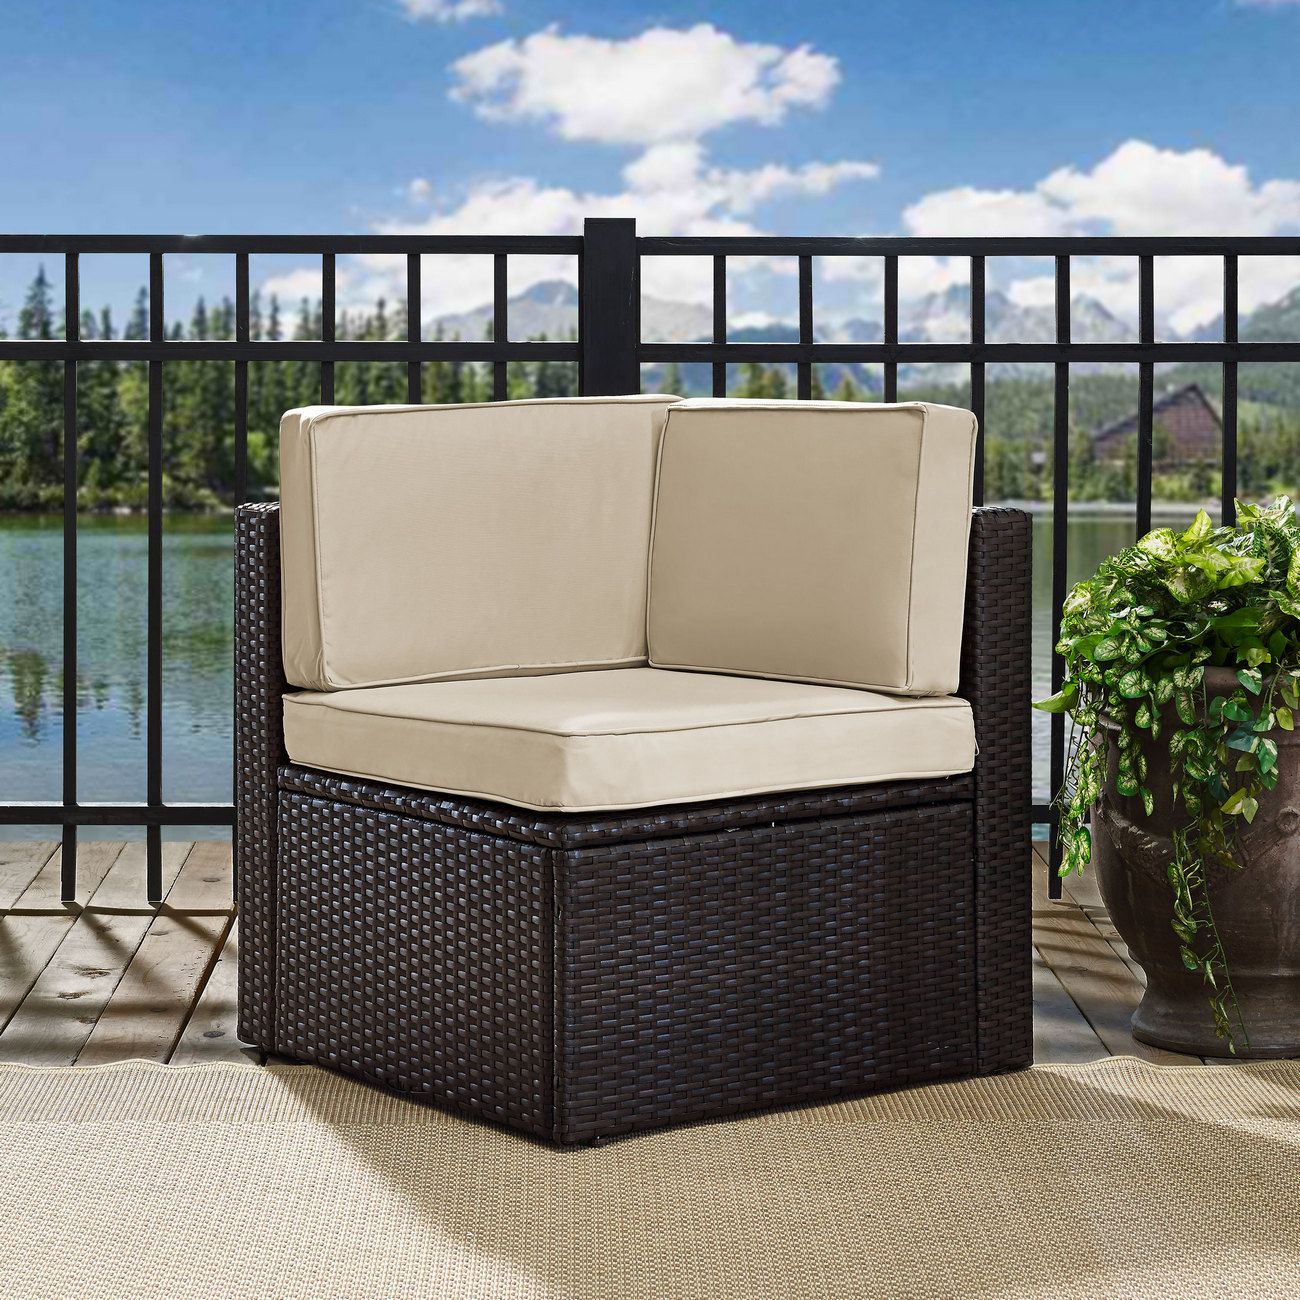 Crosley Furniture KO70088BR-GY Palm Harbor Outdoor Wicker Arm Chair Brown with Grey Cushions 